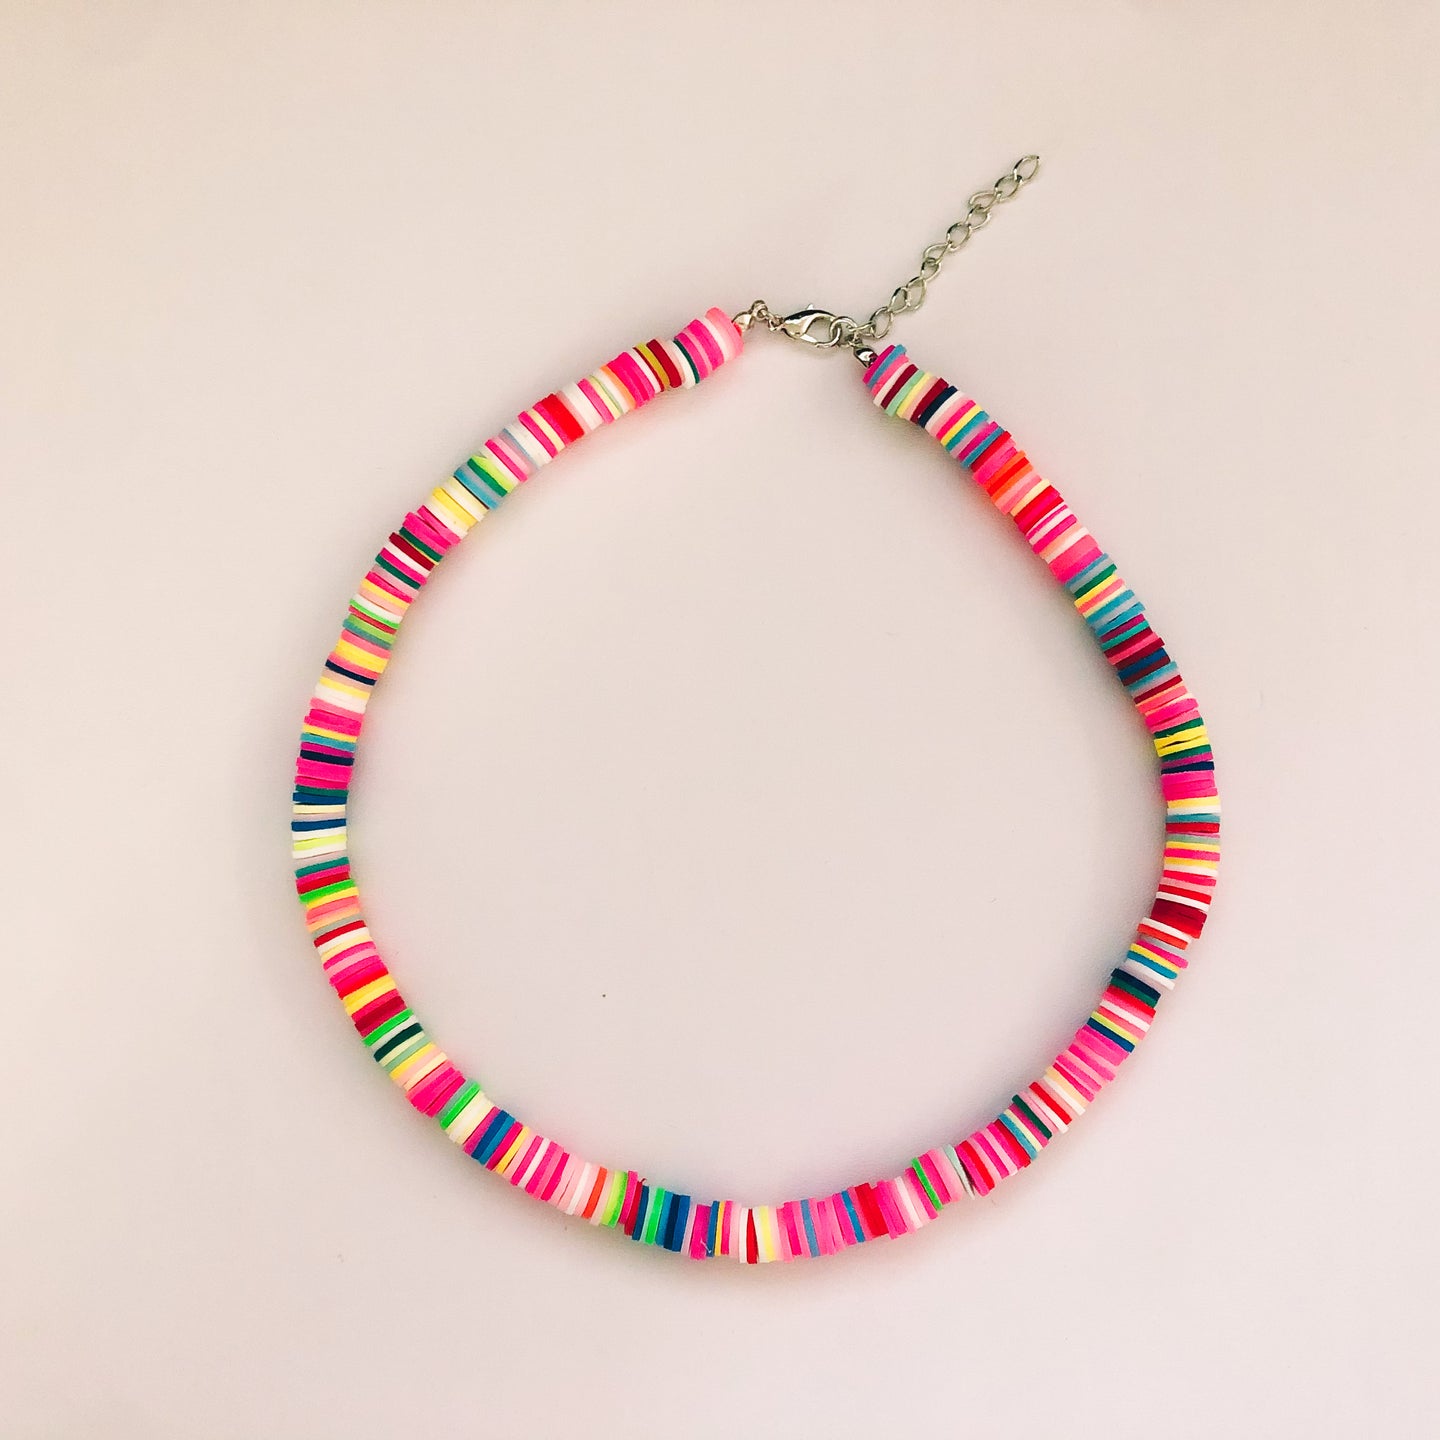 SUMMERTIME MADNESS NECKLACE